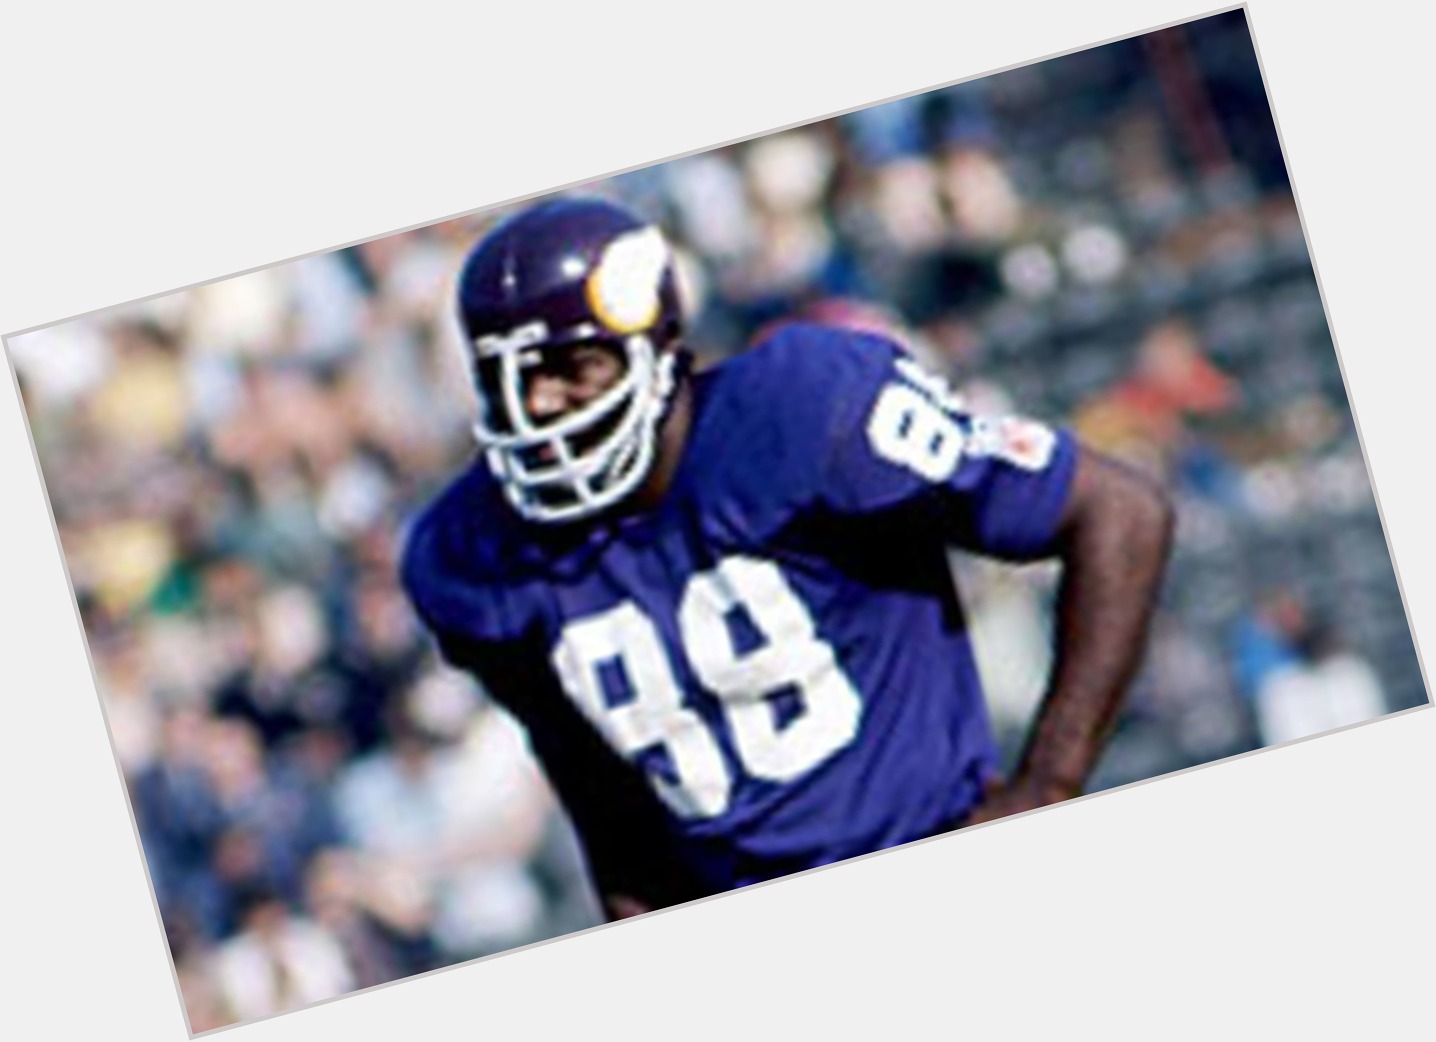 <a href="/hot-men/alan-page/where-dating-news-photos">Alan Page</a>  